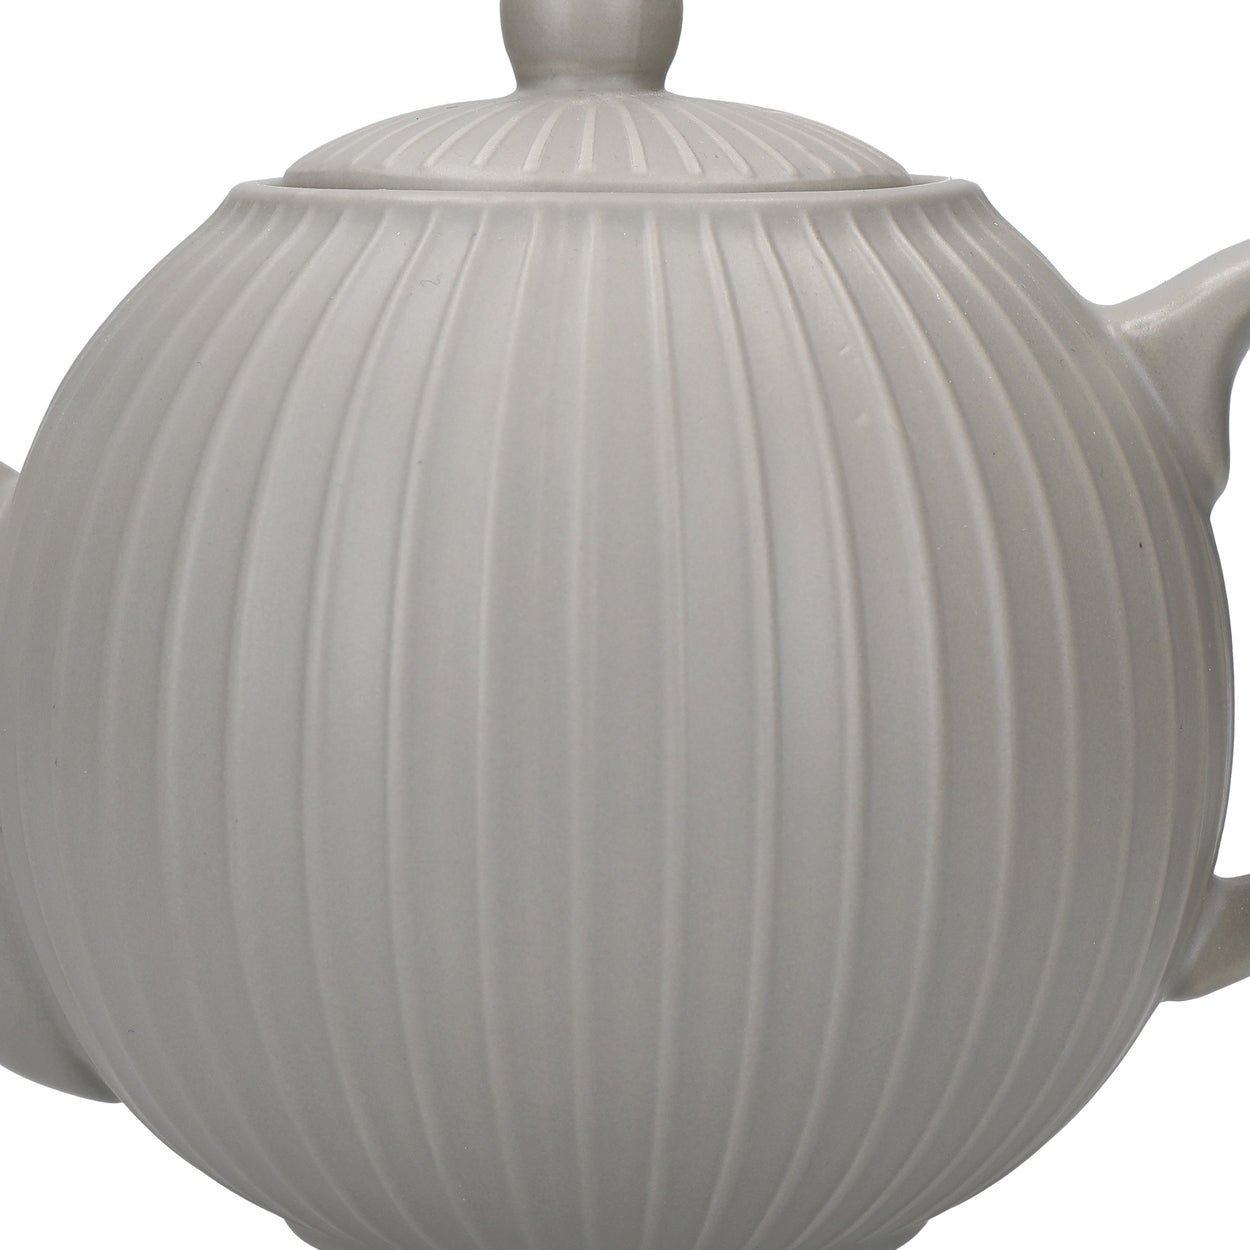 London Pottery Globe Textured Teapot with Strainer, 4-Cup, Grey